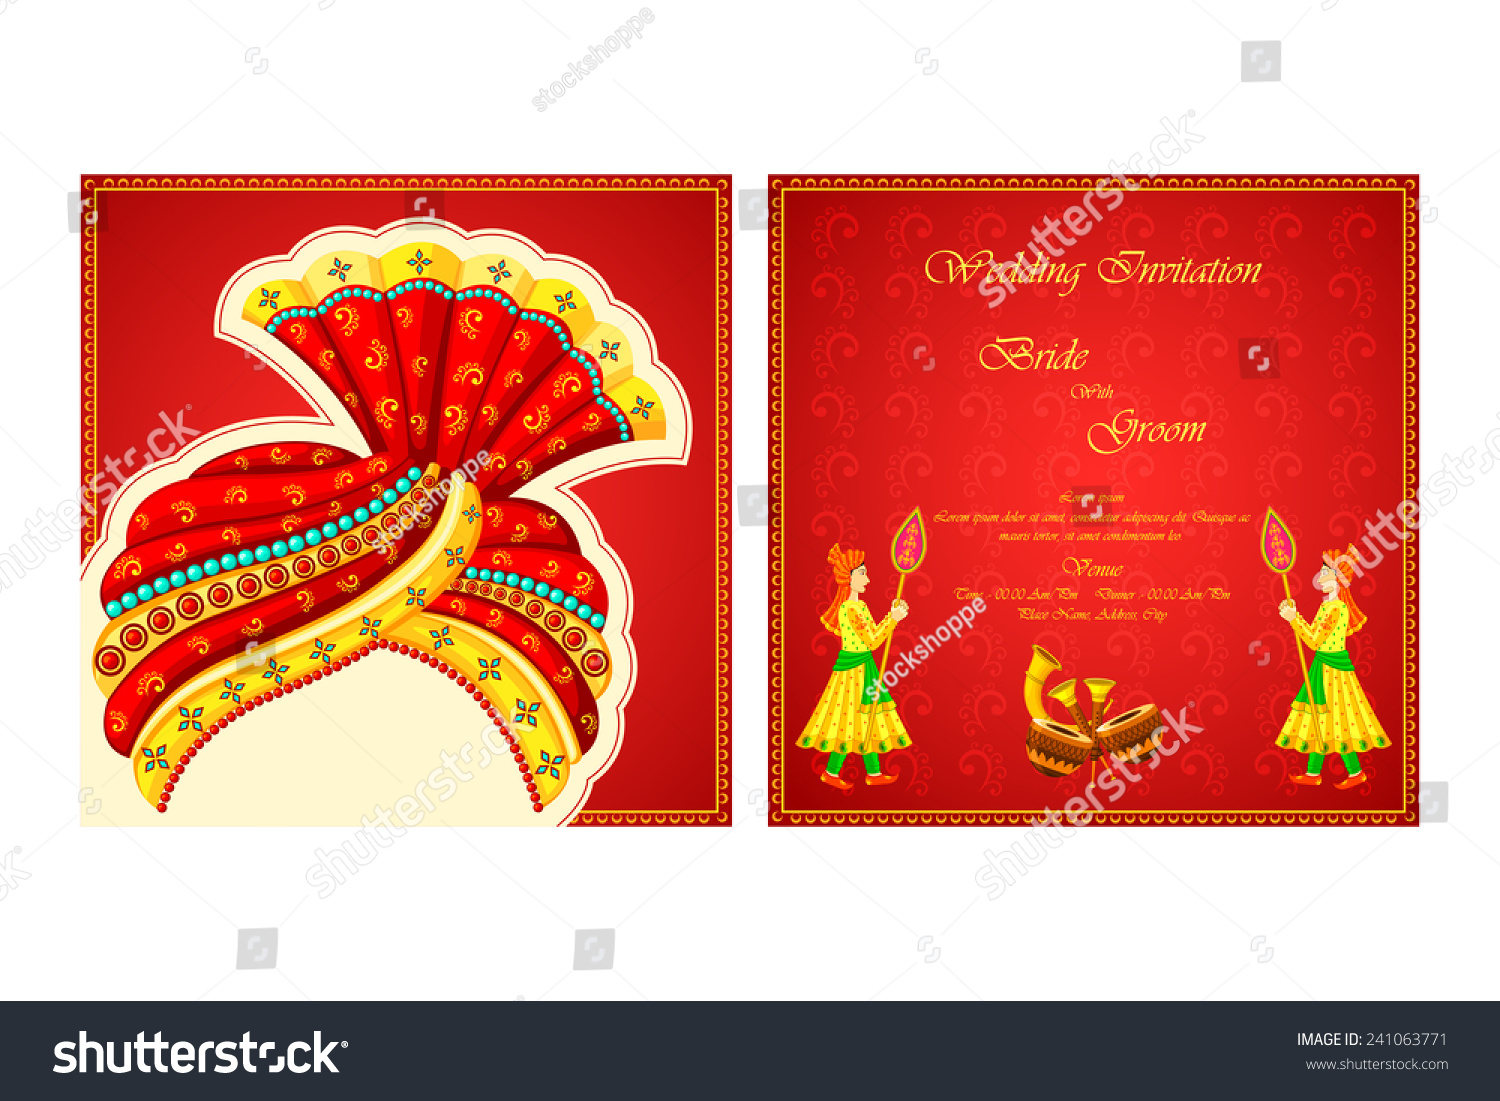 indian wedding clipart vector free download - photo #9